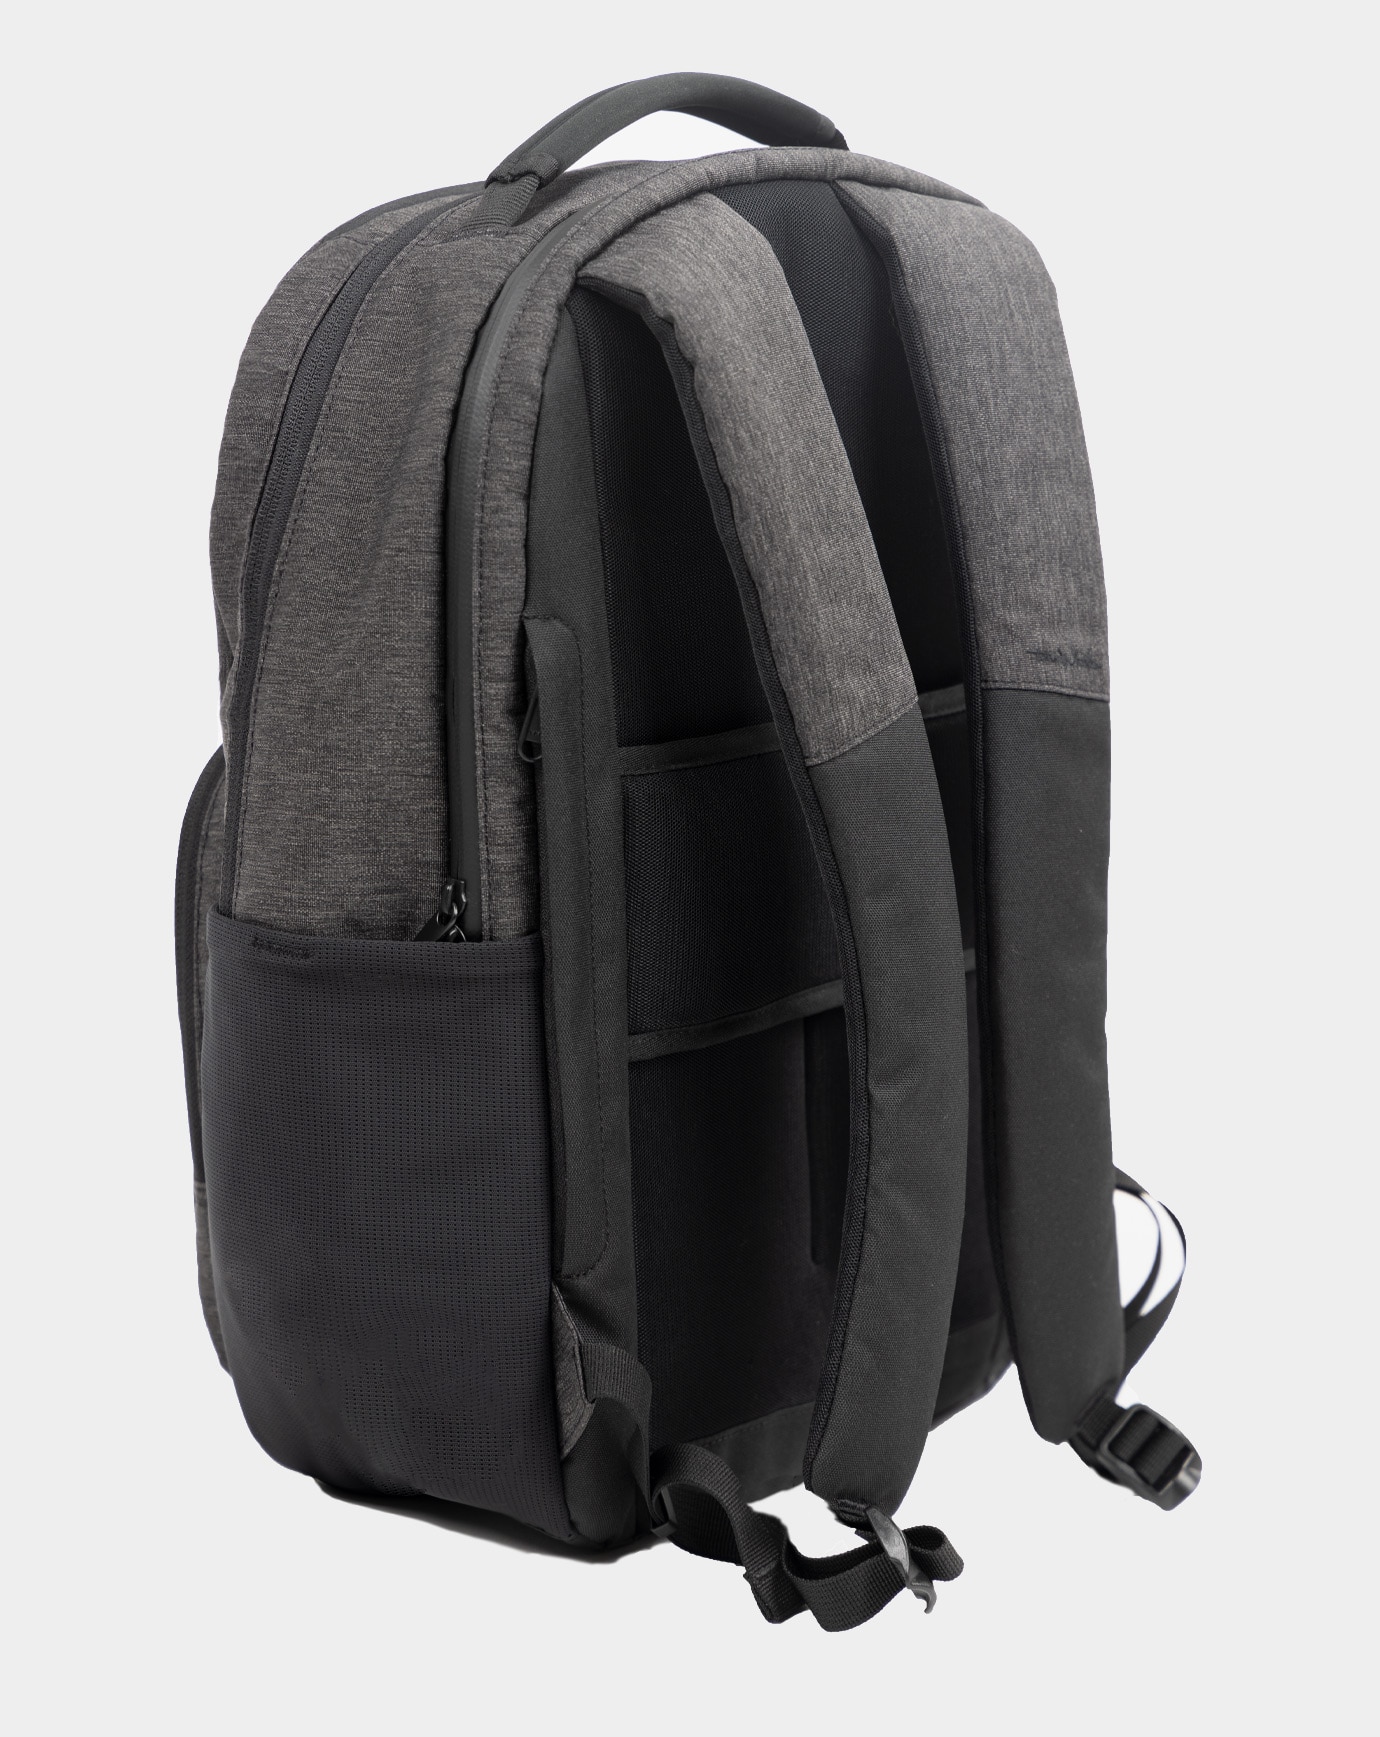 STEADYPACK BACKPACK Image Thumbnail 3